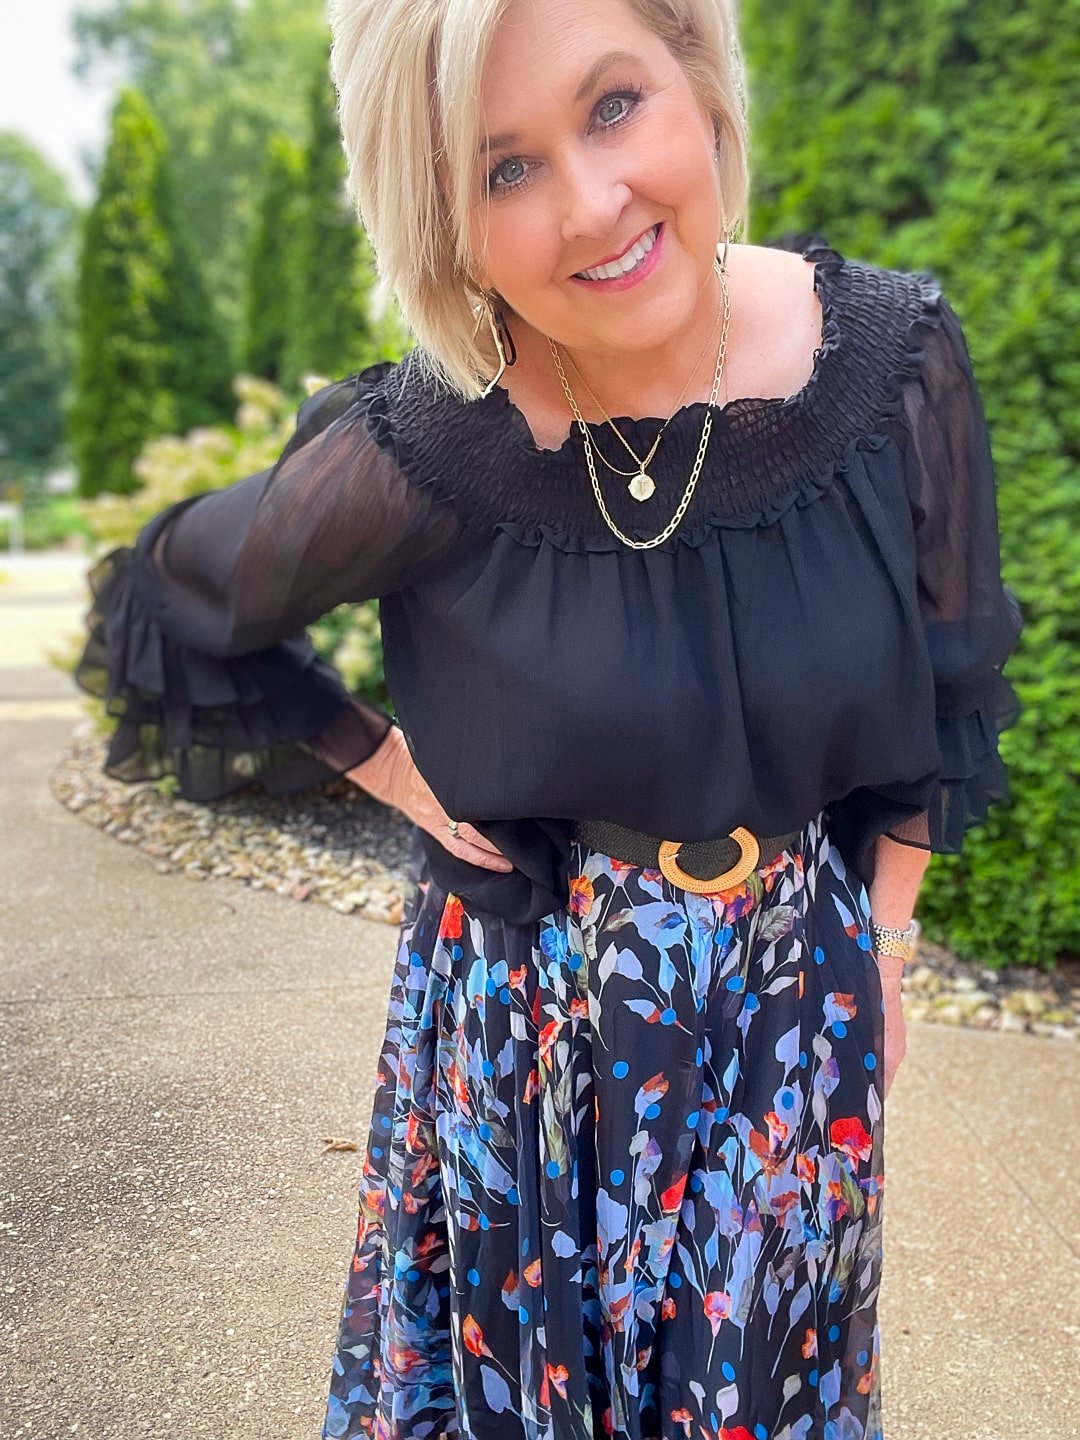 Over 40 Fashion Blogger, Tania Stephens is styling a floral chiffon skirt for a fall wedding23